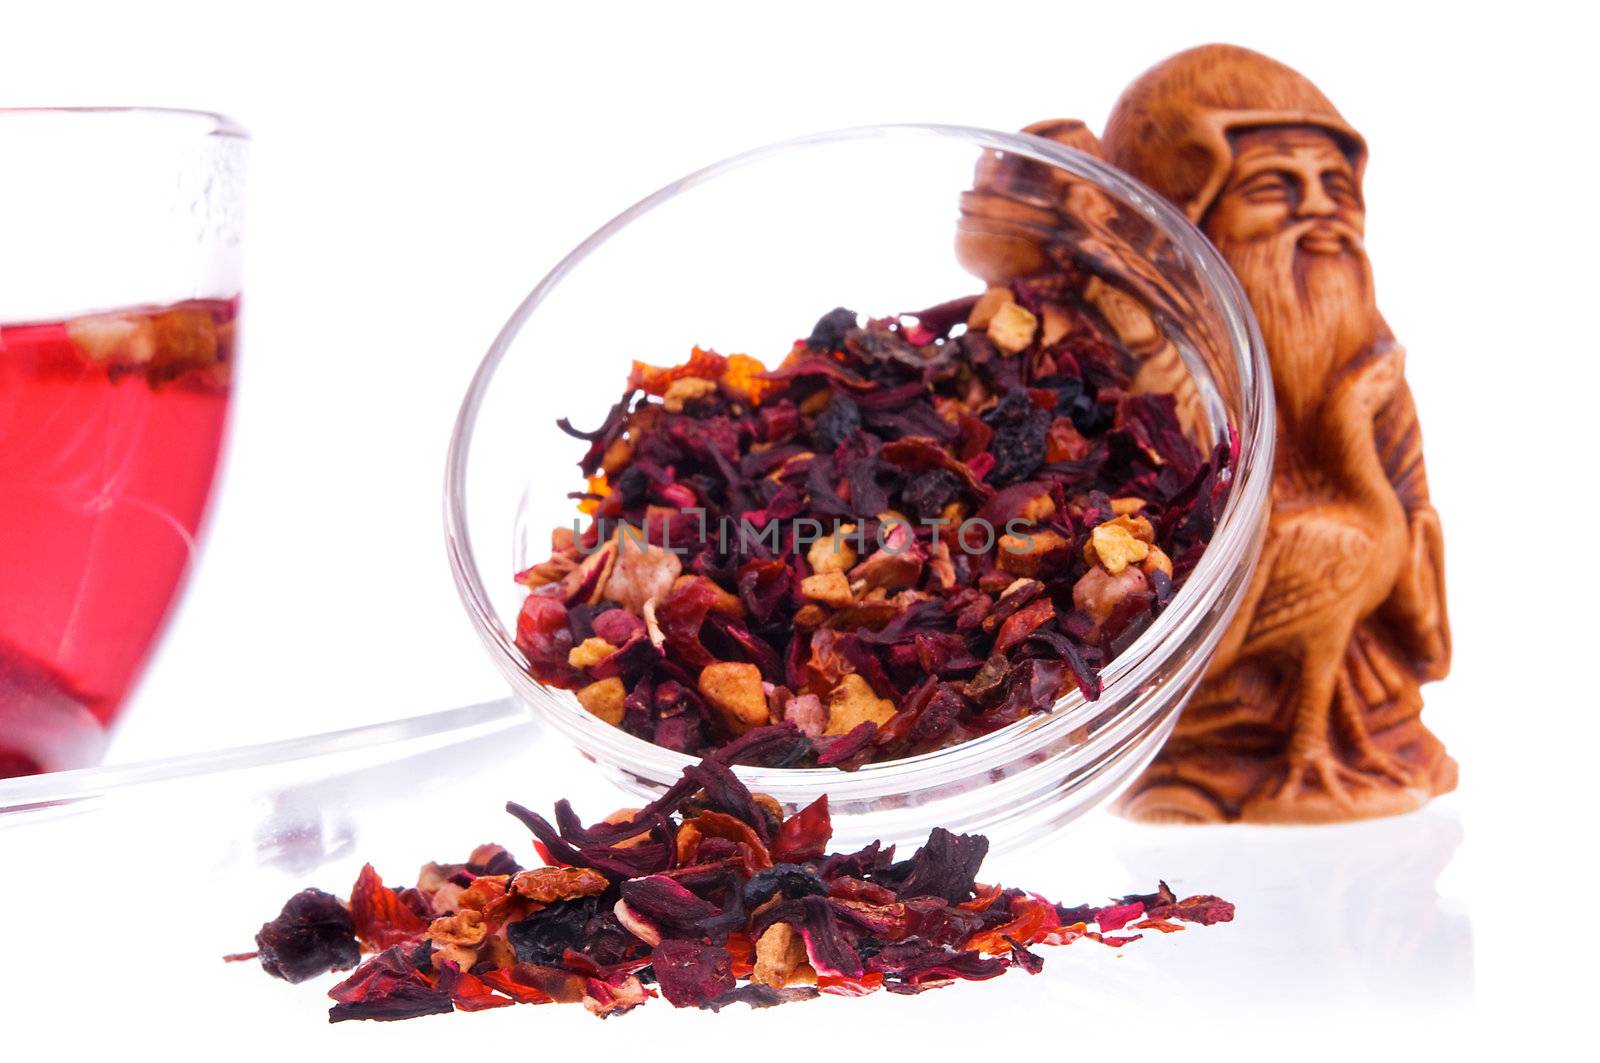 Healthy dry fruit tea in a transparent saucers and idol of prosperity statuette on background out of focus. Shallow depth-of-field, focus on tea heap.